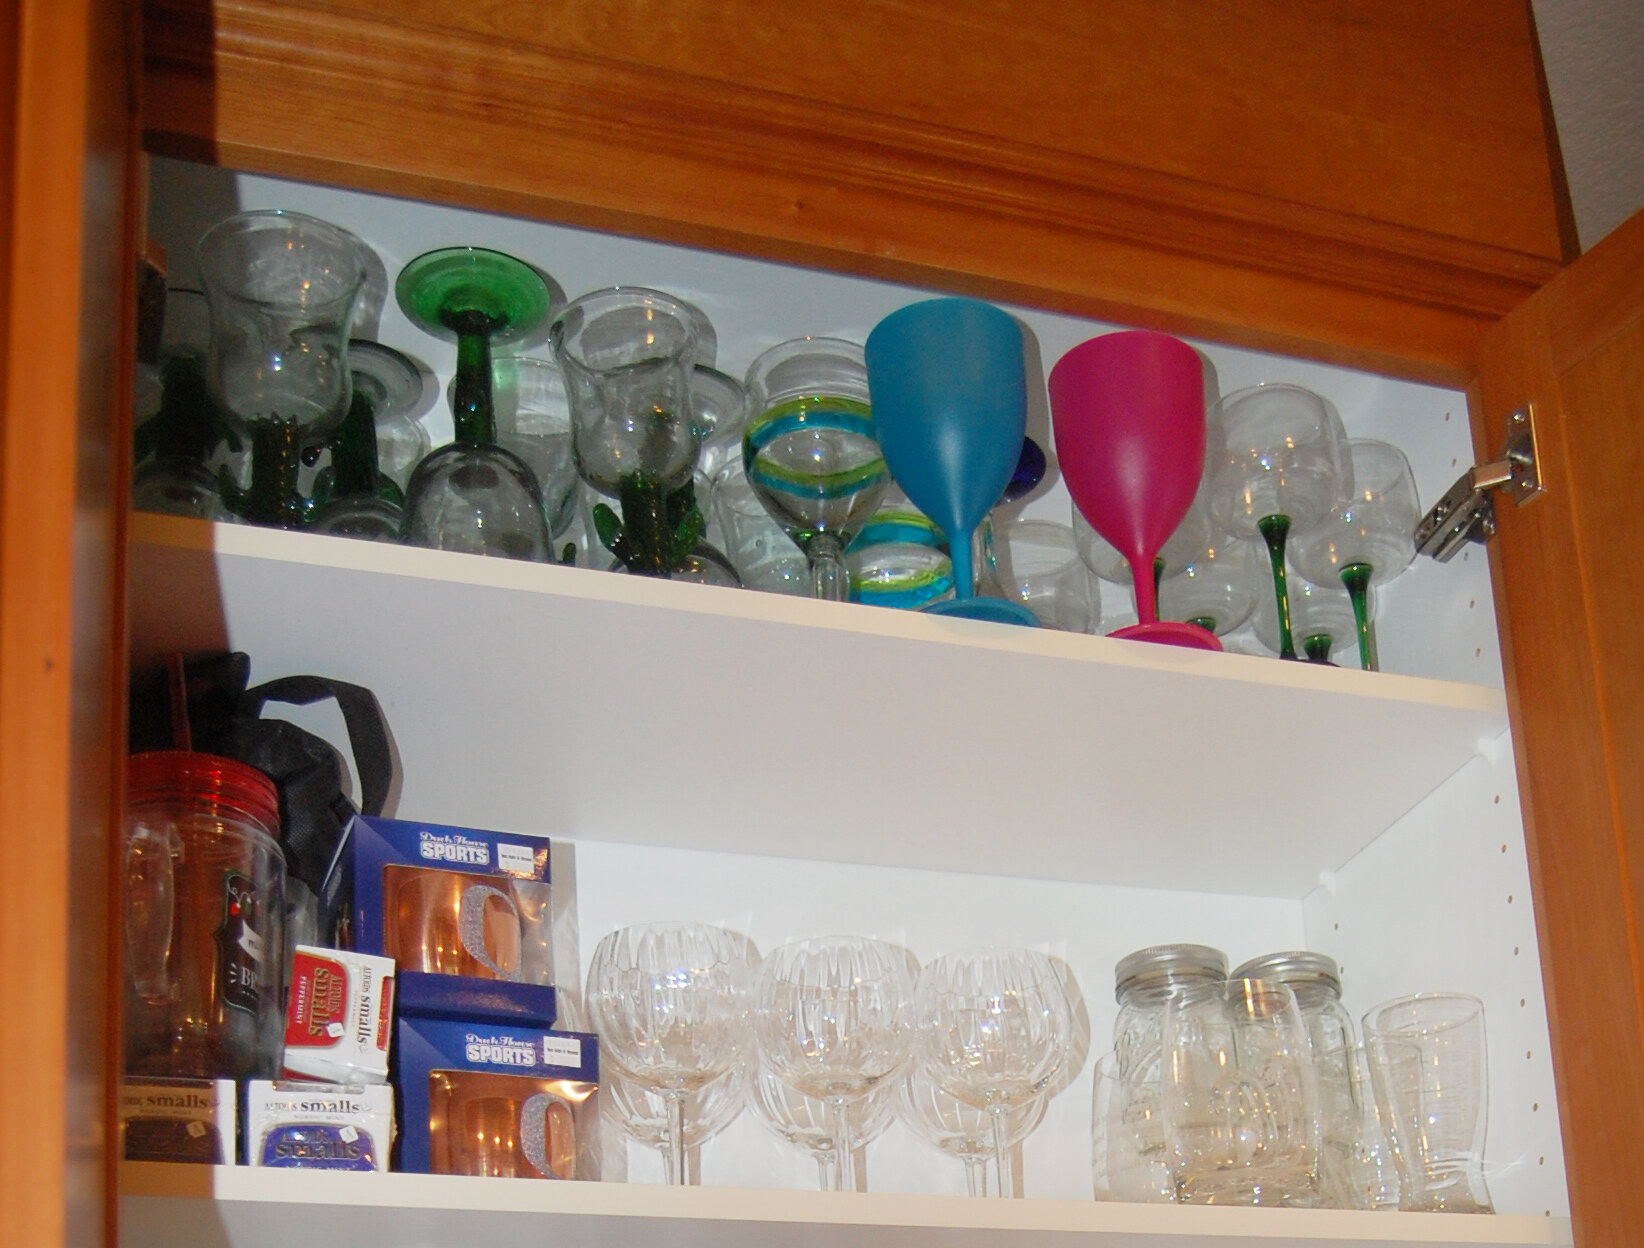 Extra glassware stored beyond reach